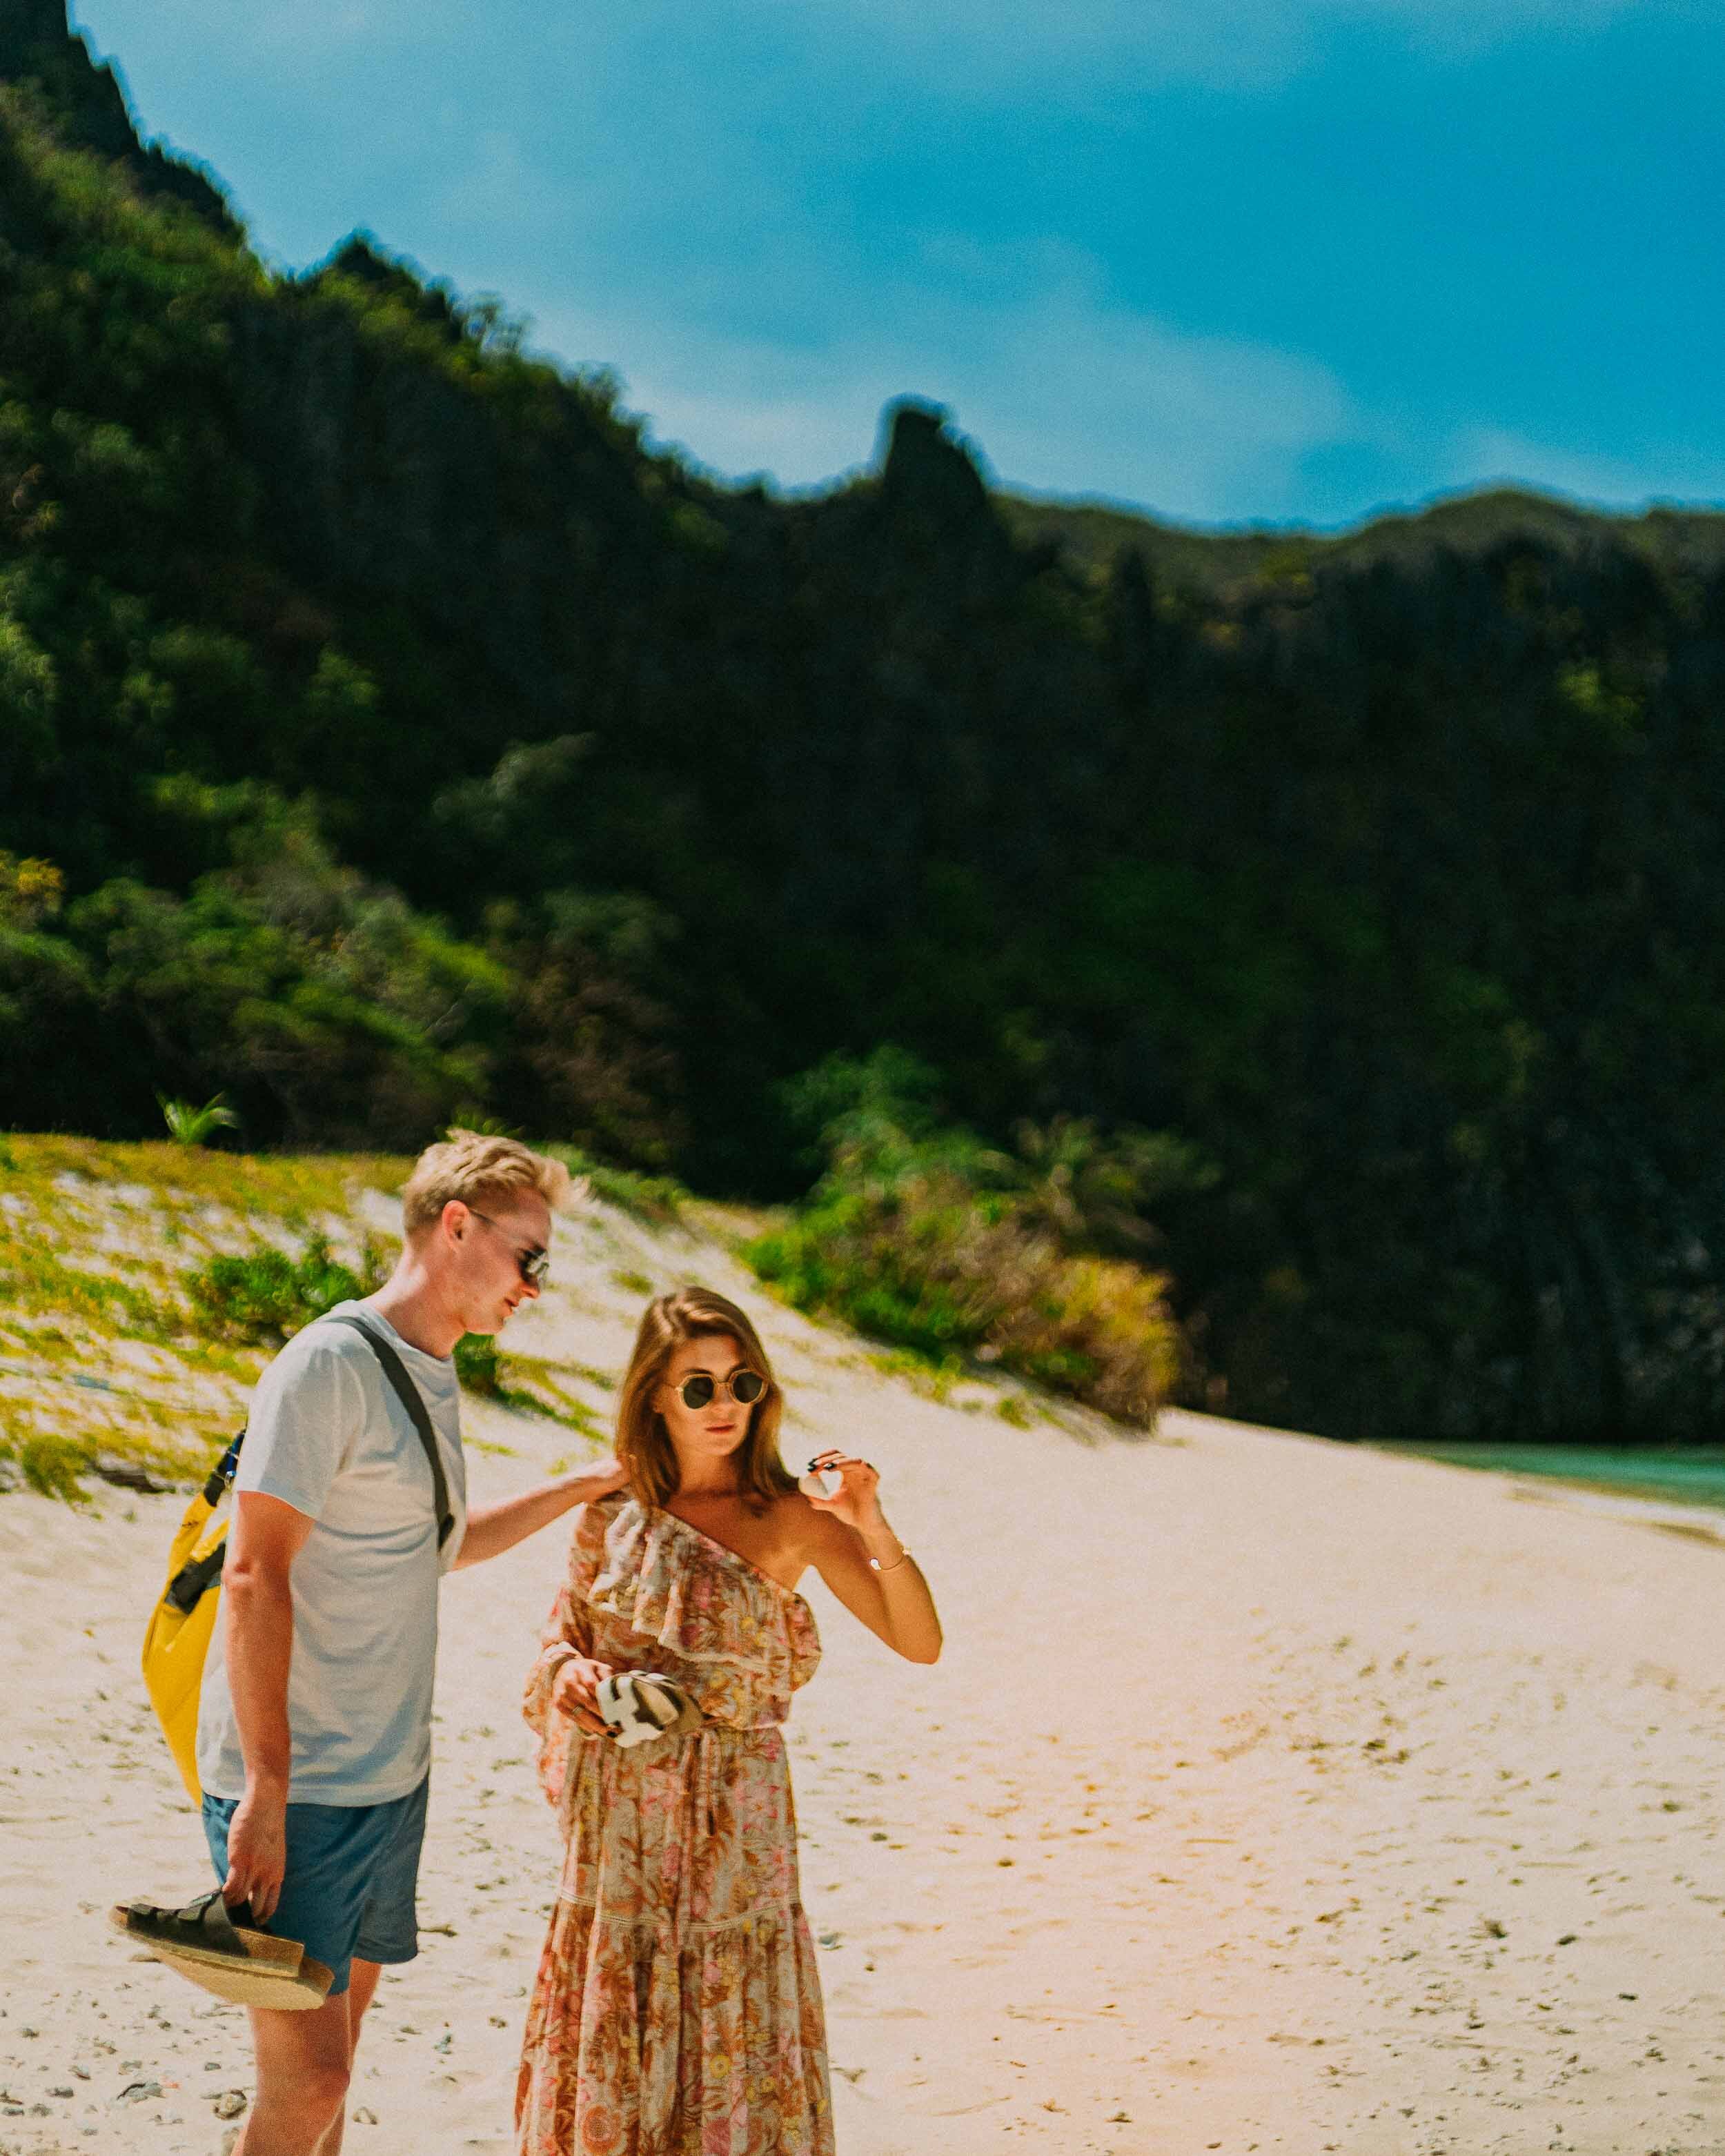 20 El Nido Philippines Couple Photography Honeymoon portraits in Palawan, March 2020. Travel couple photography in Southeast Asia x @hejguj.jpg